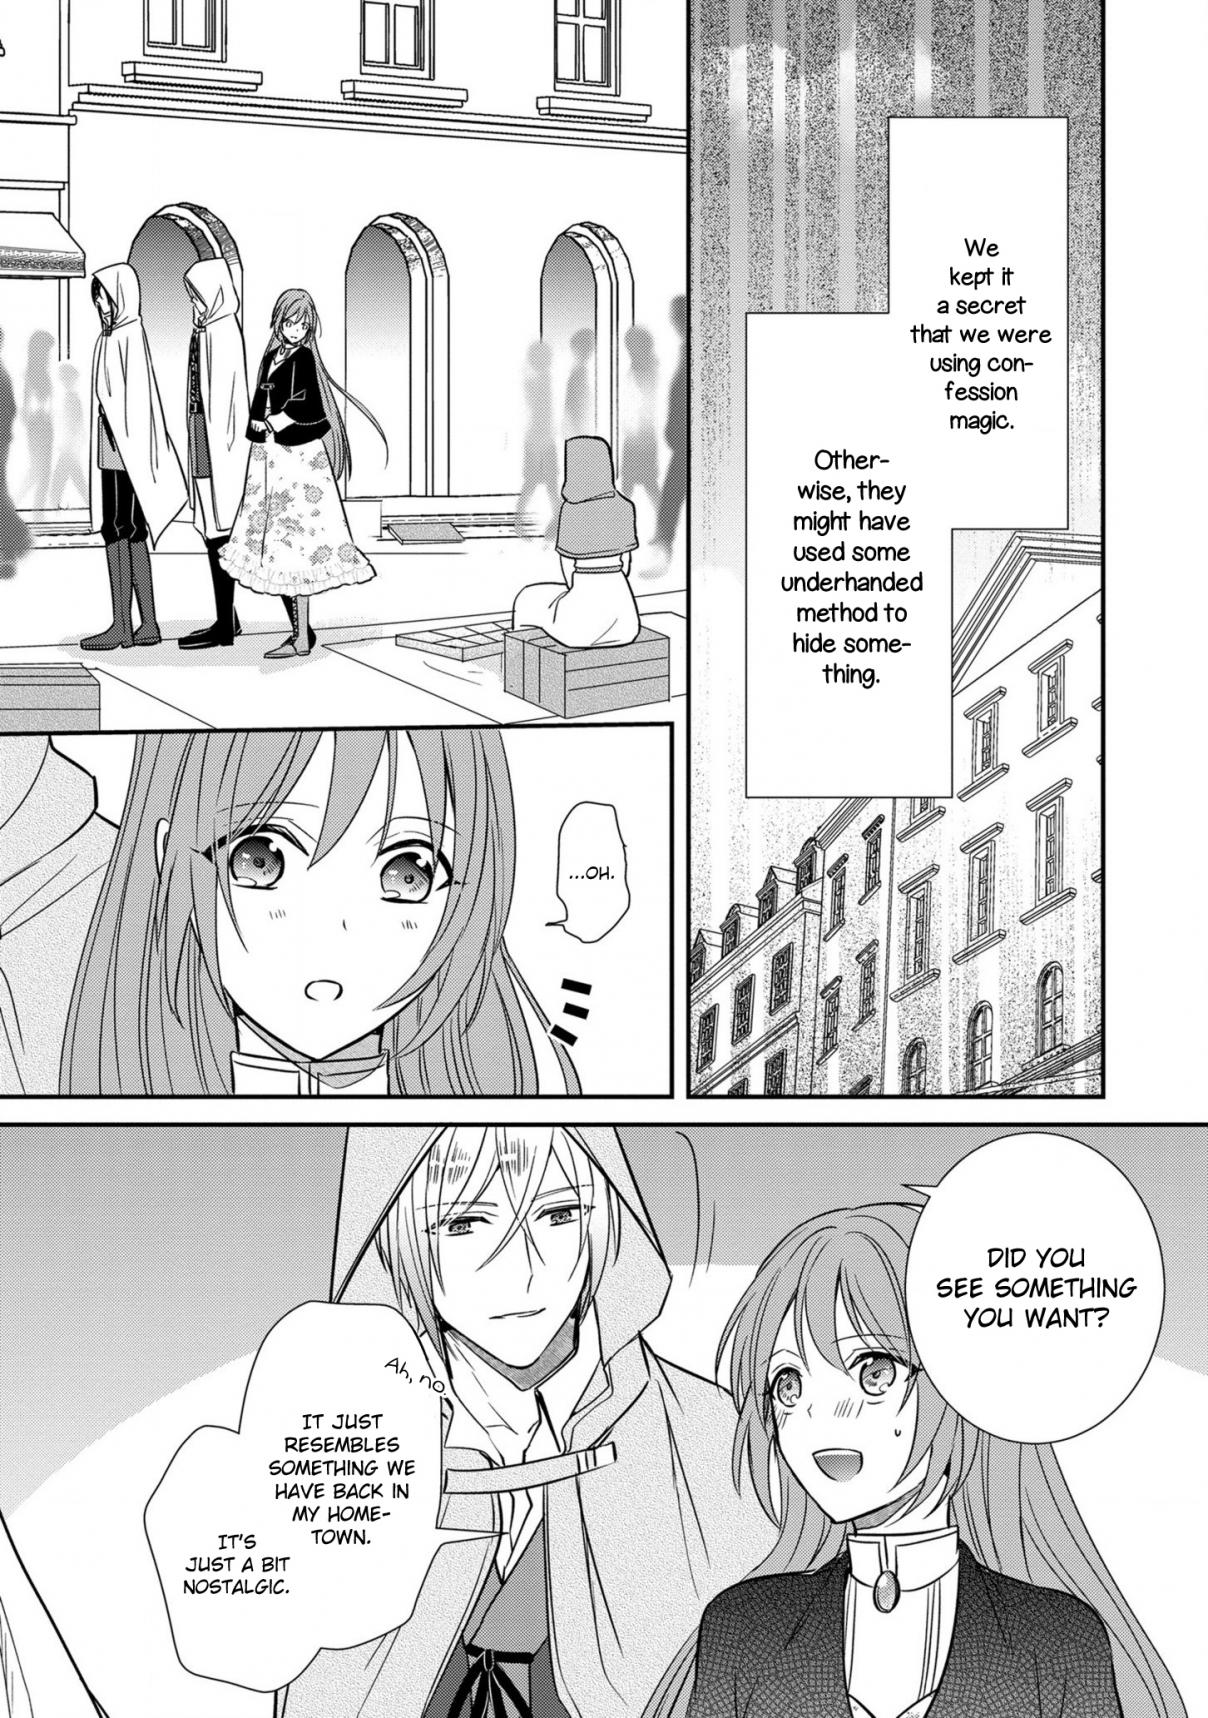 The Emperor's Court Lady is Wanted as a Bride Ch. 7